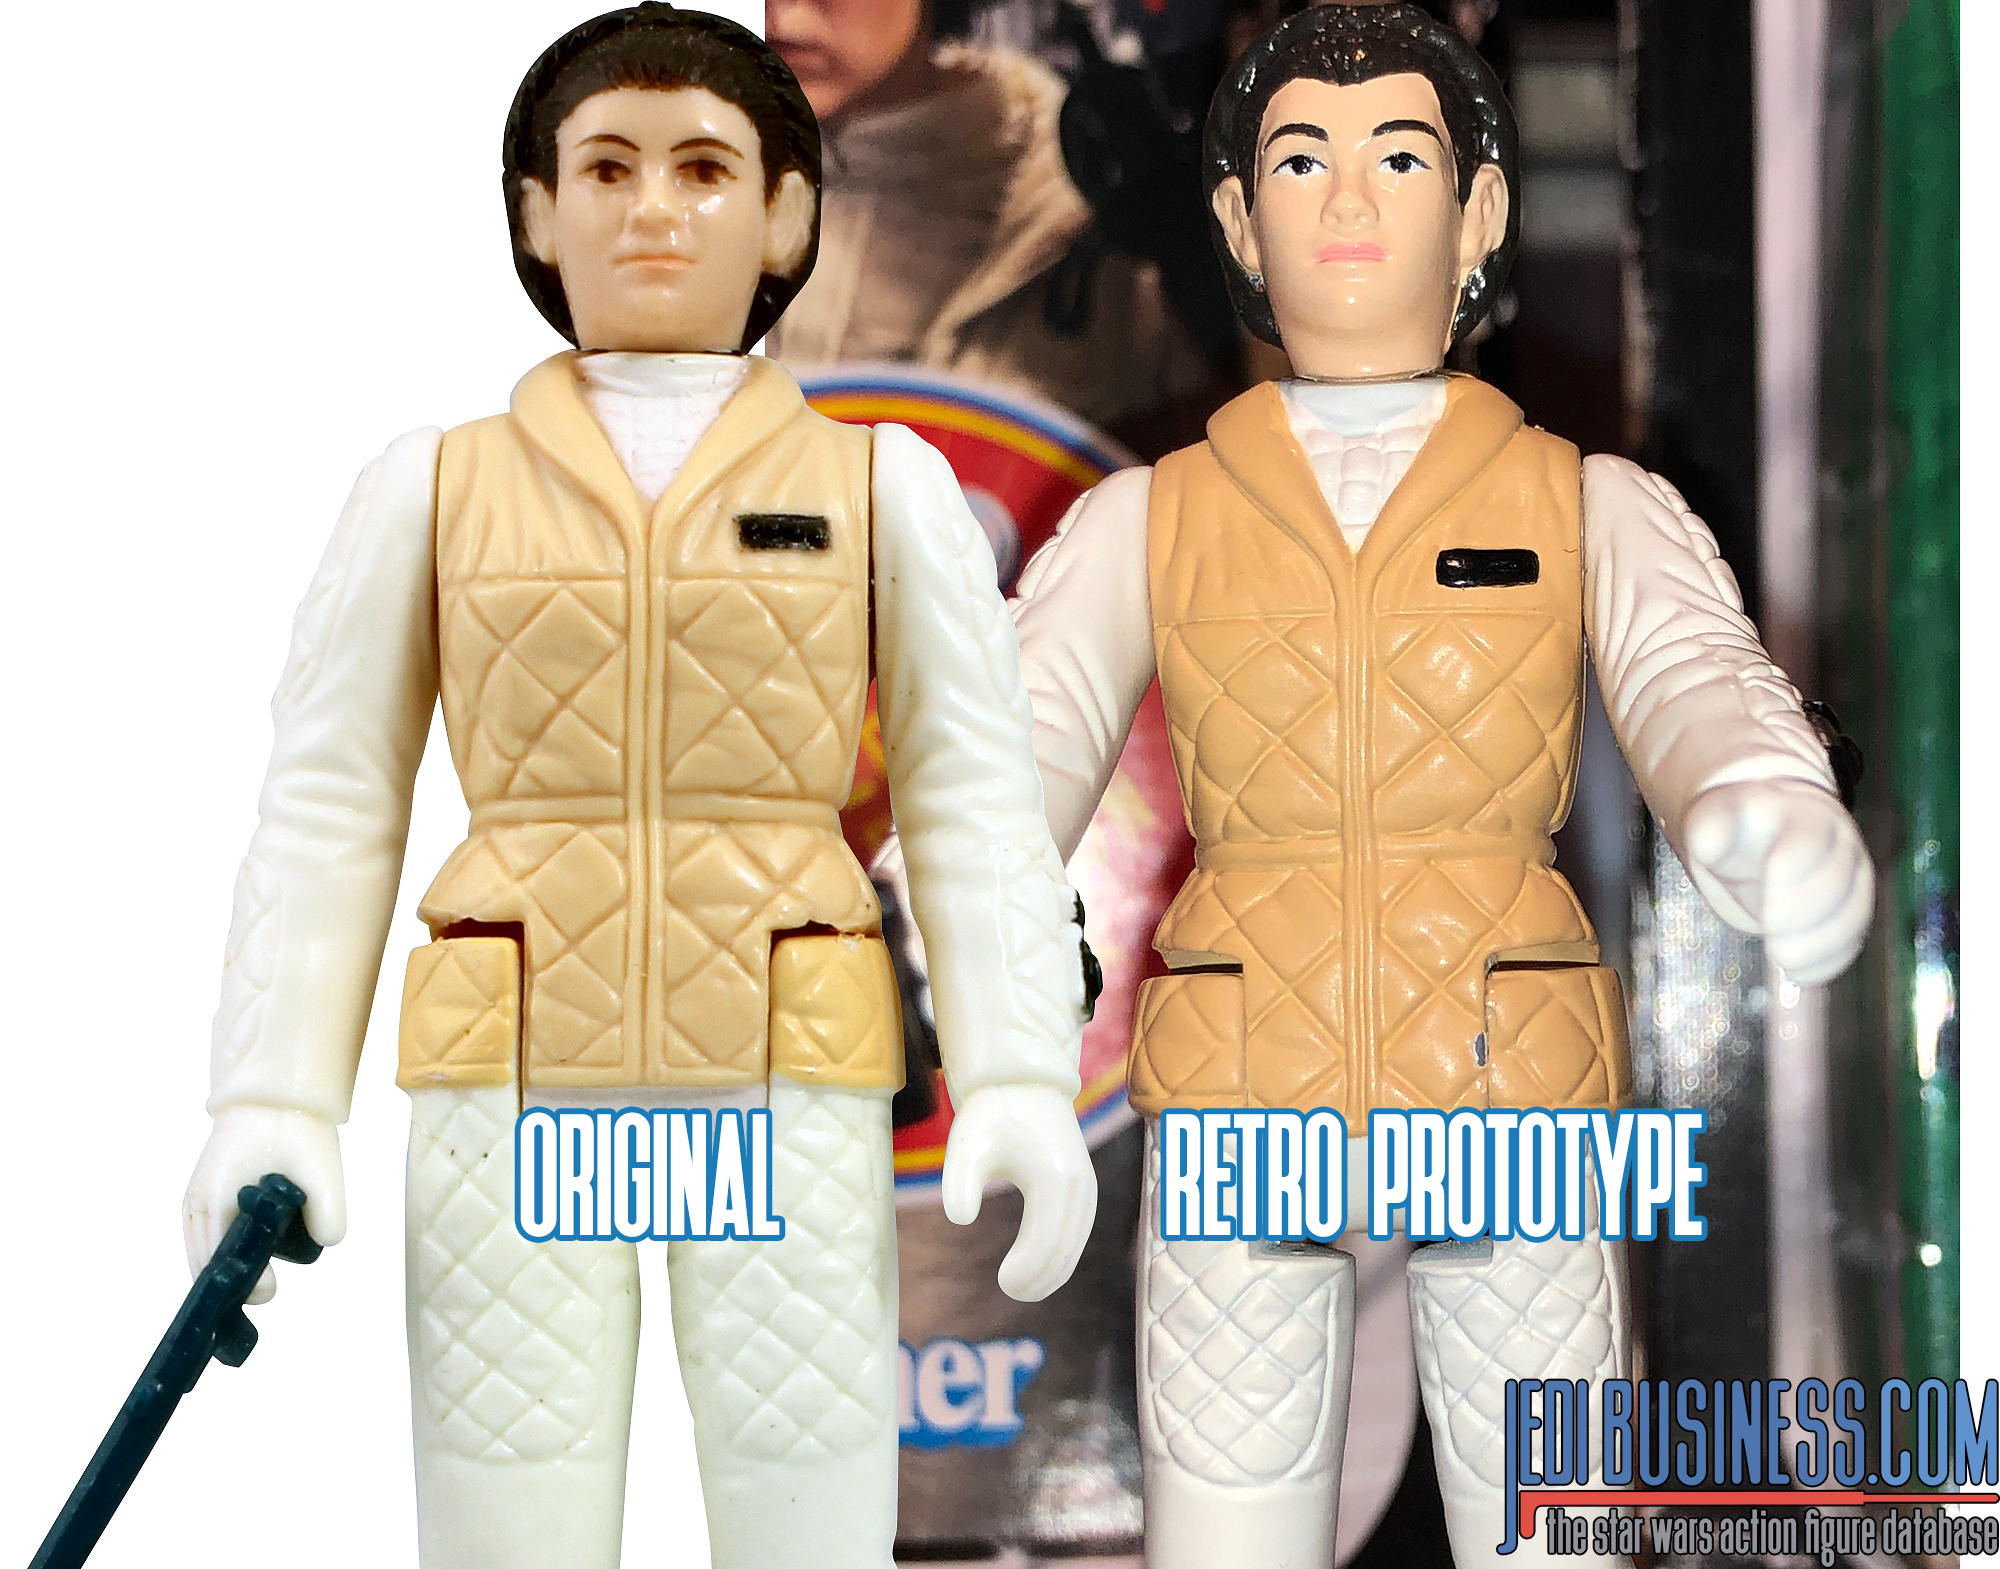 Star Wars Retro Collection At New York Toy Fair 2020 Princess Leia Hoth